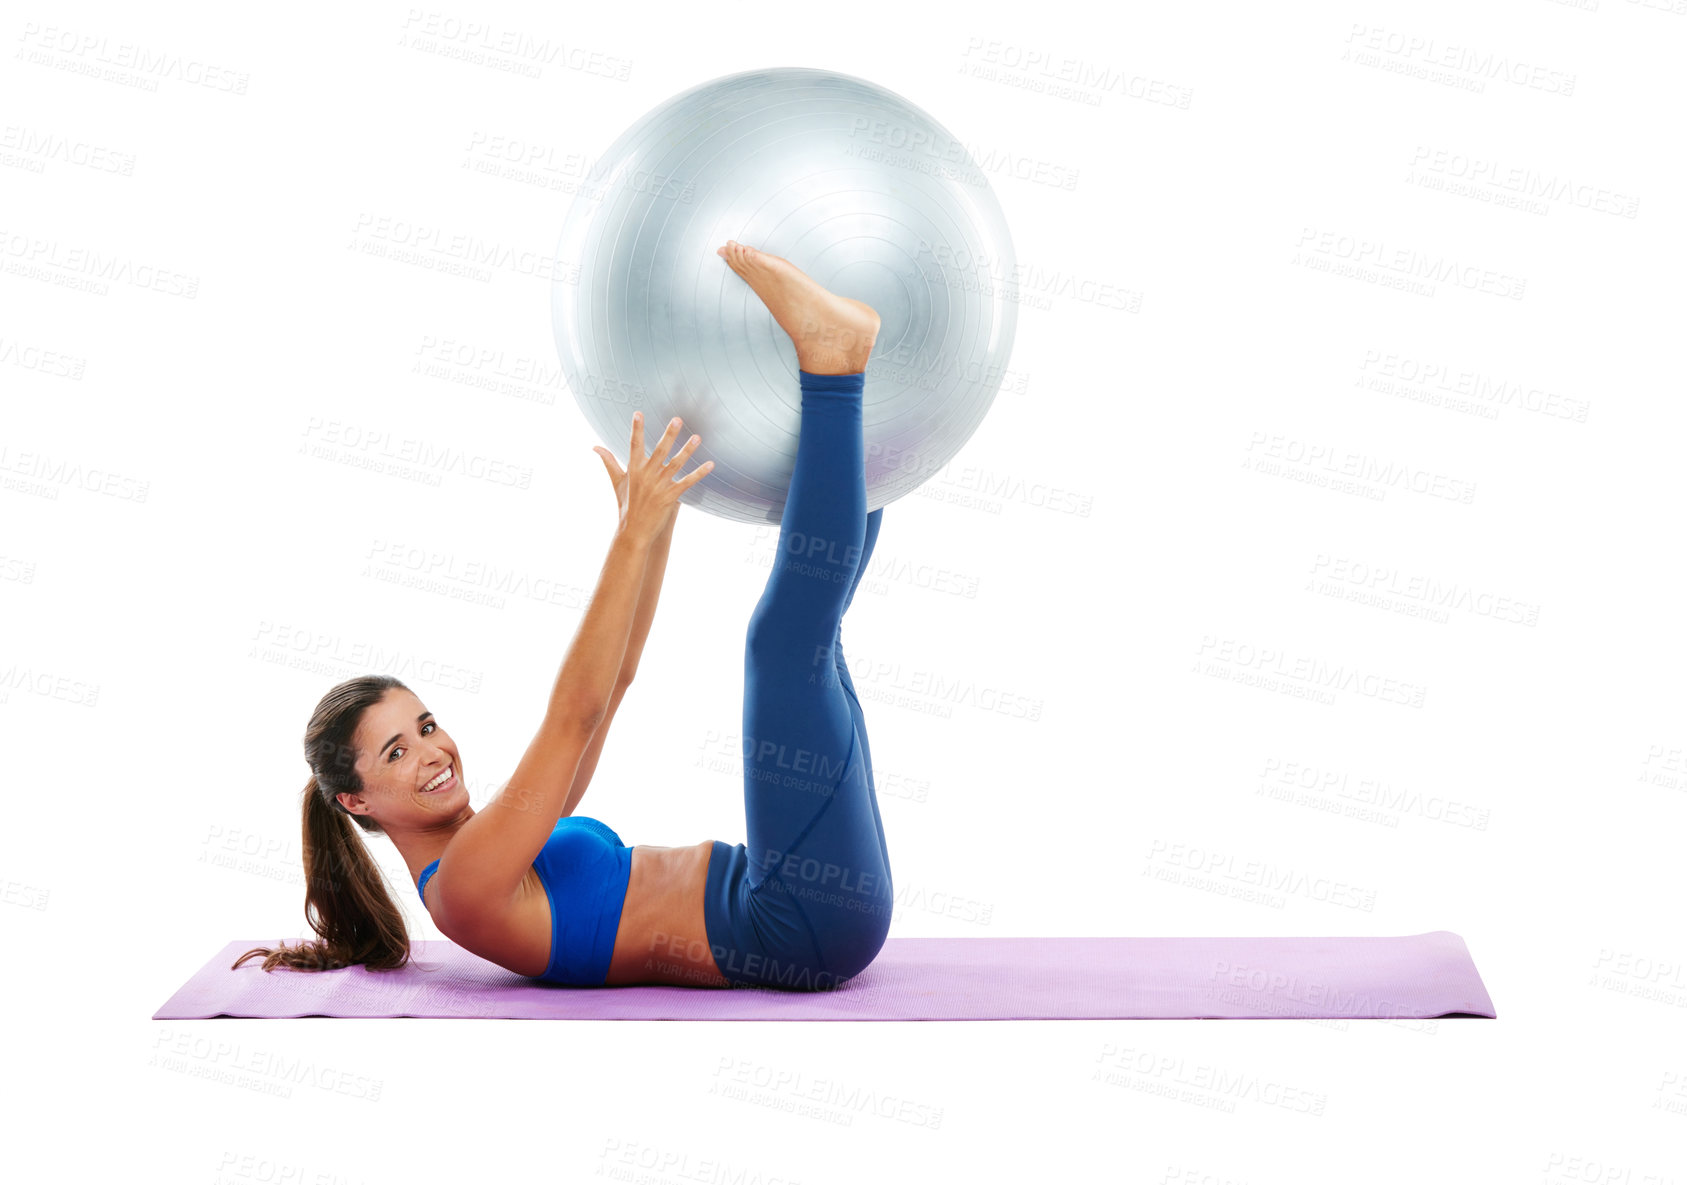 Buy stock photo Portrait of a sporty young woman practising yoga against a white background